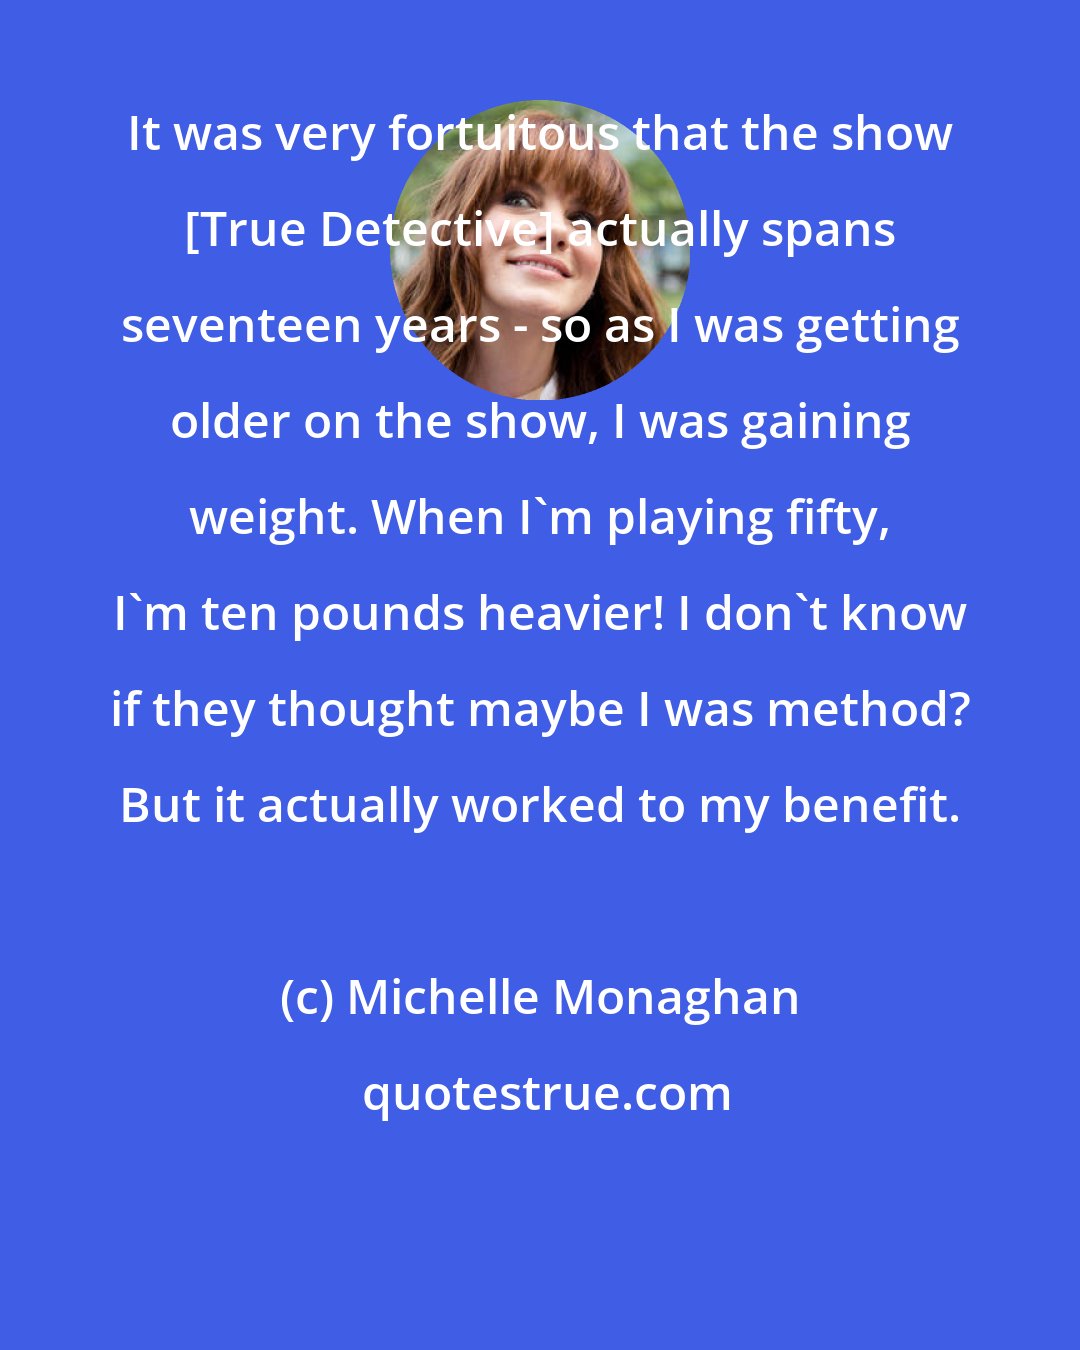 Michelle Monaghan: It was very fortuitous that the show [True Detective] actually spans seventeen years - so as I was getting older on the show, I was gaining weight. When I'm playing fifty, I'm ten pounds heavier! I don't know if they thought maybe I was method? But it actually worked to my benefit.